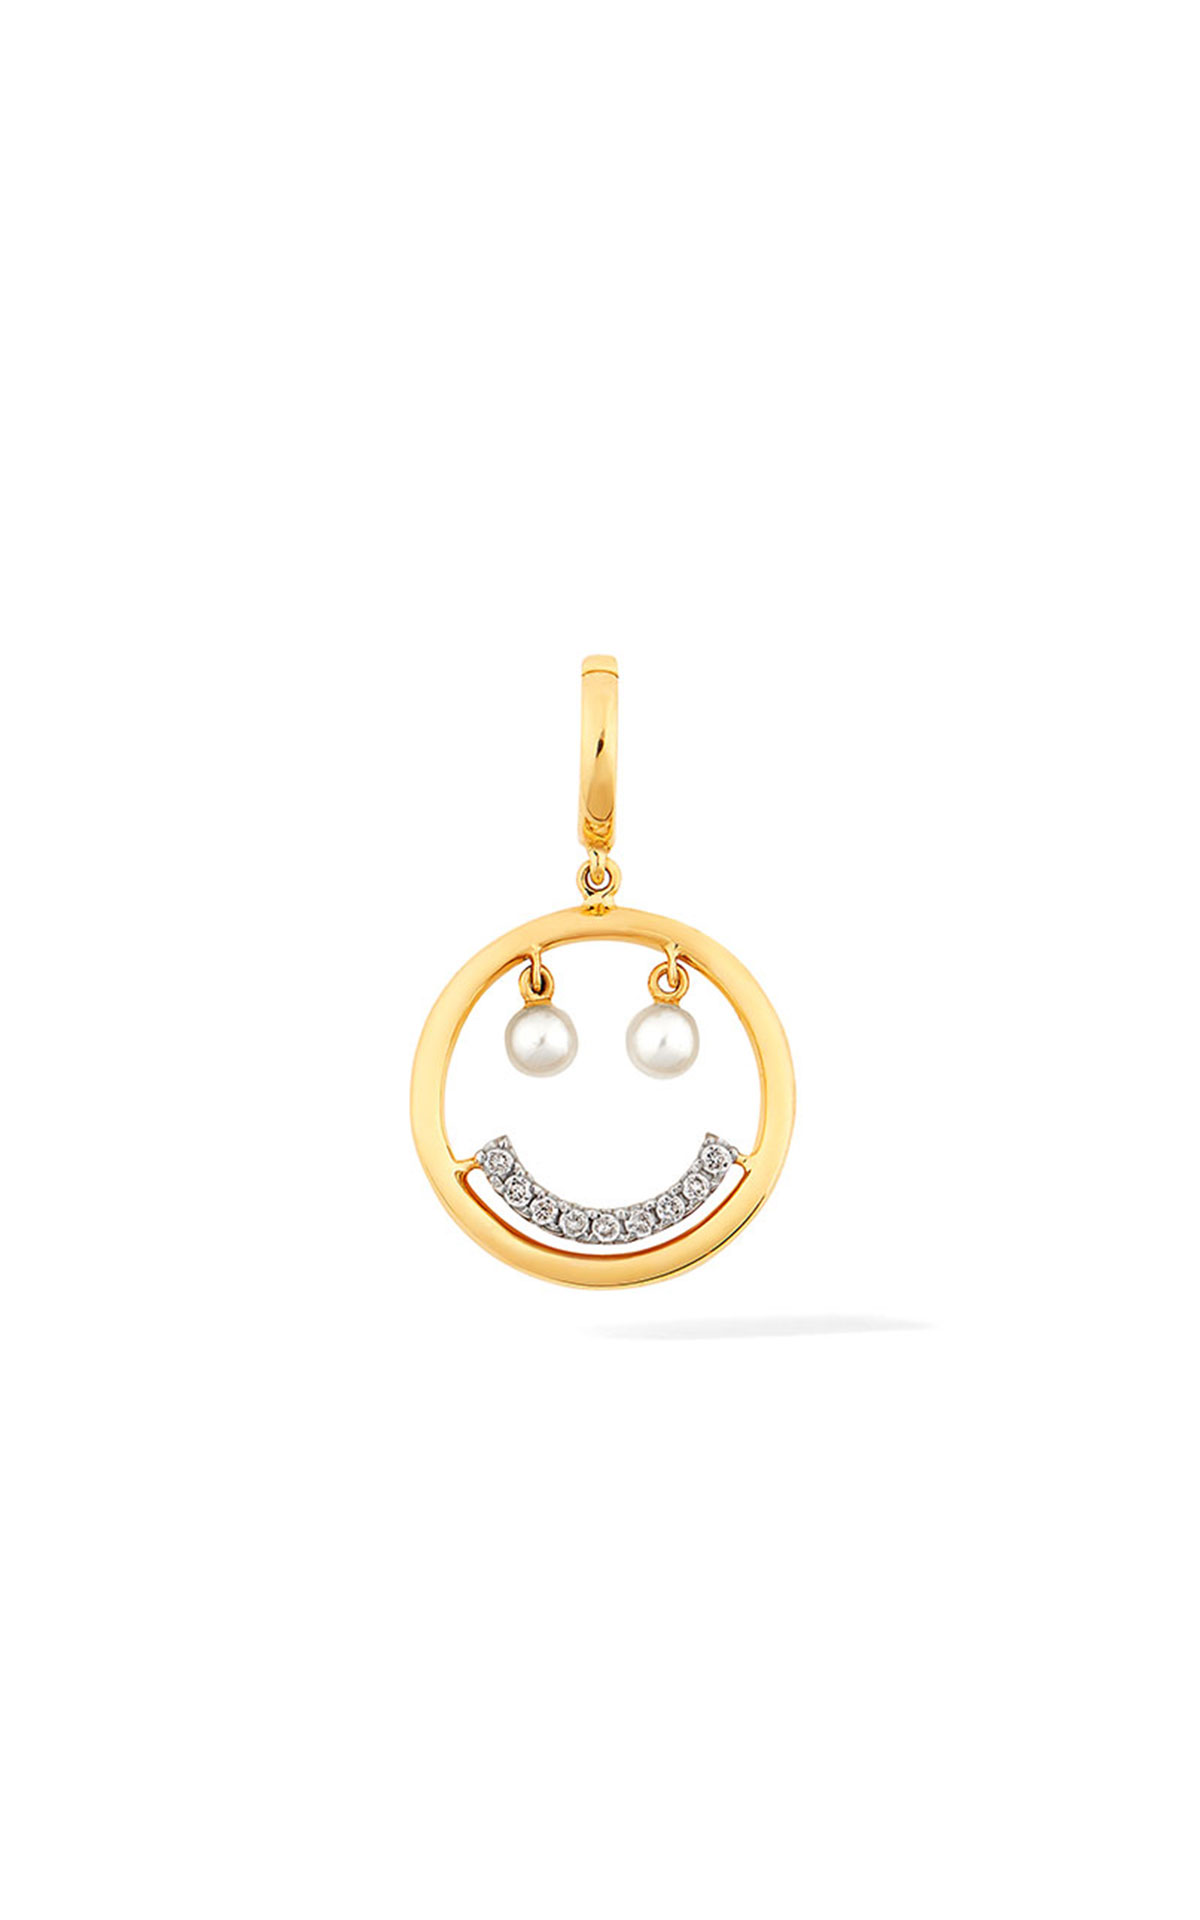 Annoushka Smiley face charm from Bicester Village